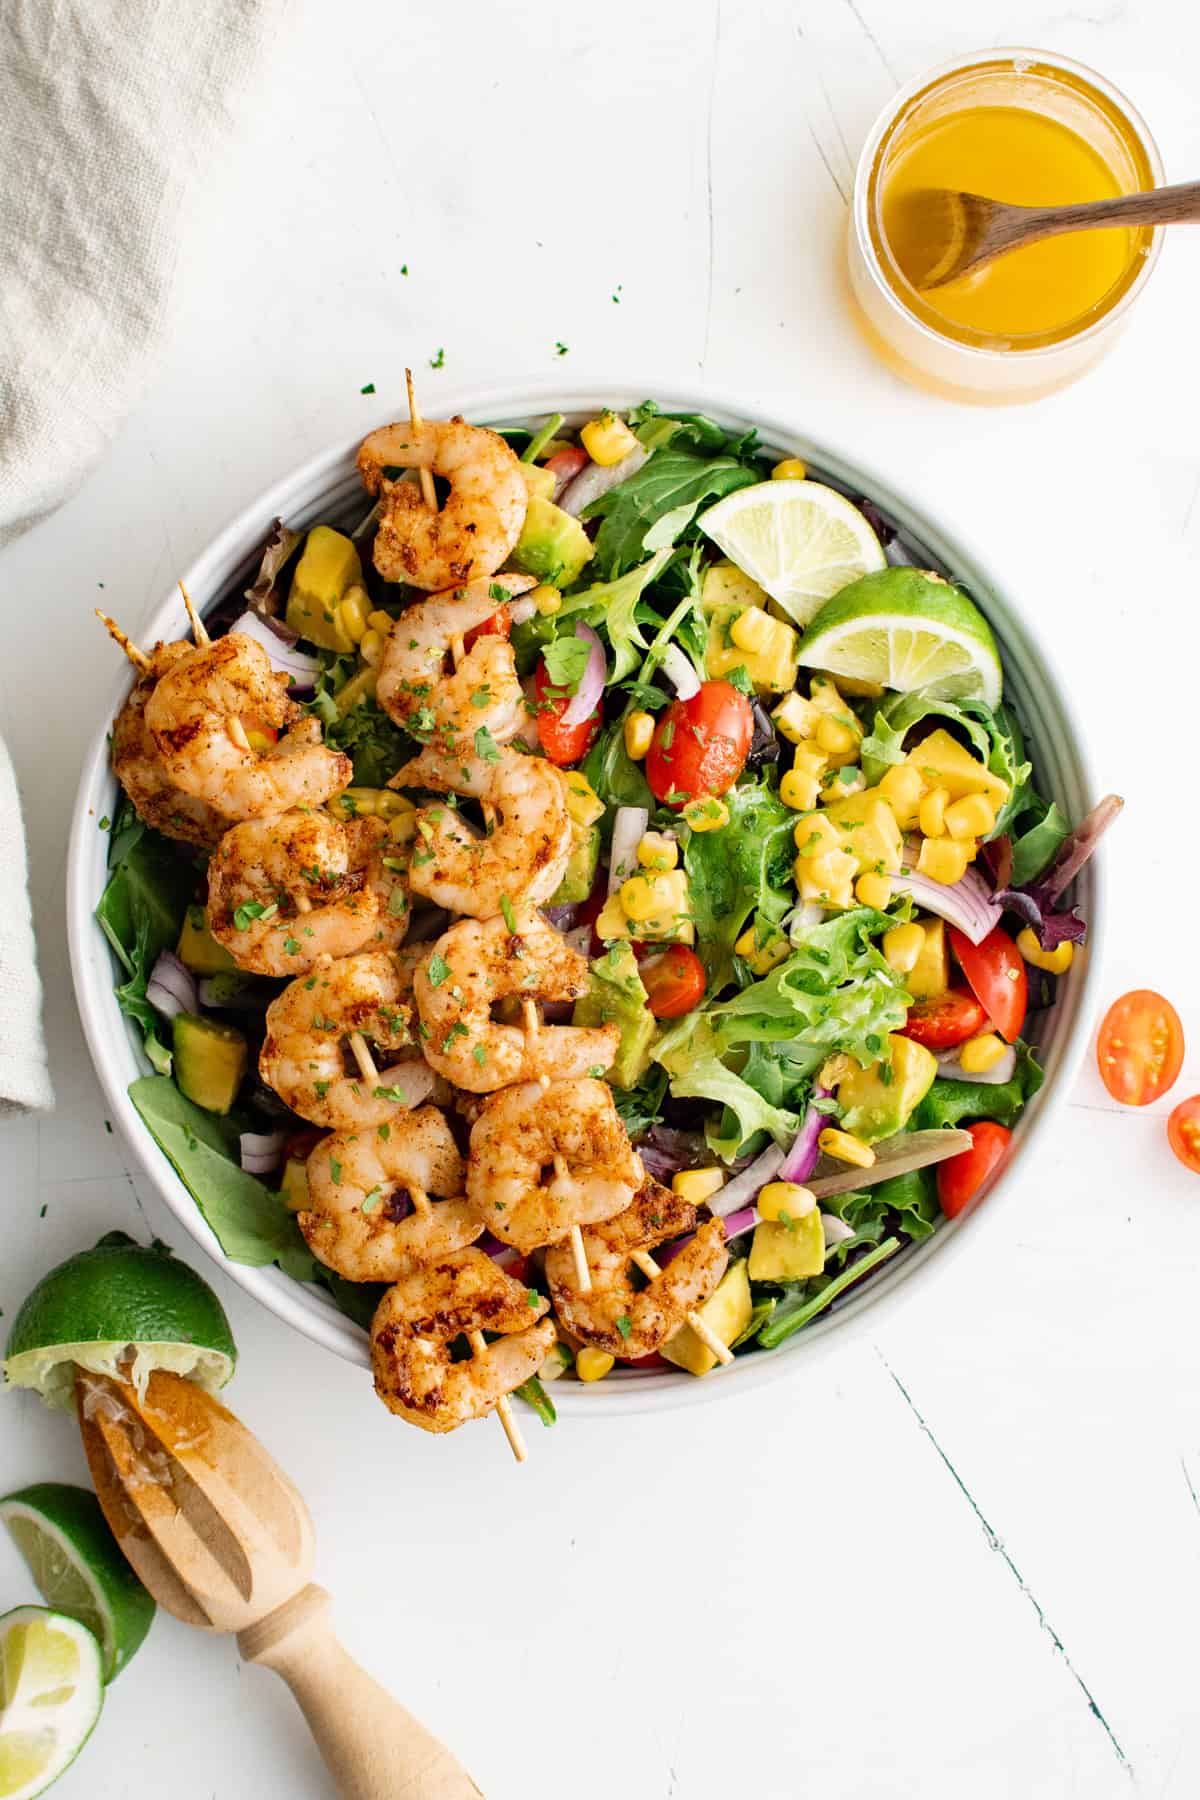 bowl of green salad with bits of corn, onions, tomatoes, avocado, and topped with skewers of grilled shrimp